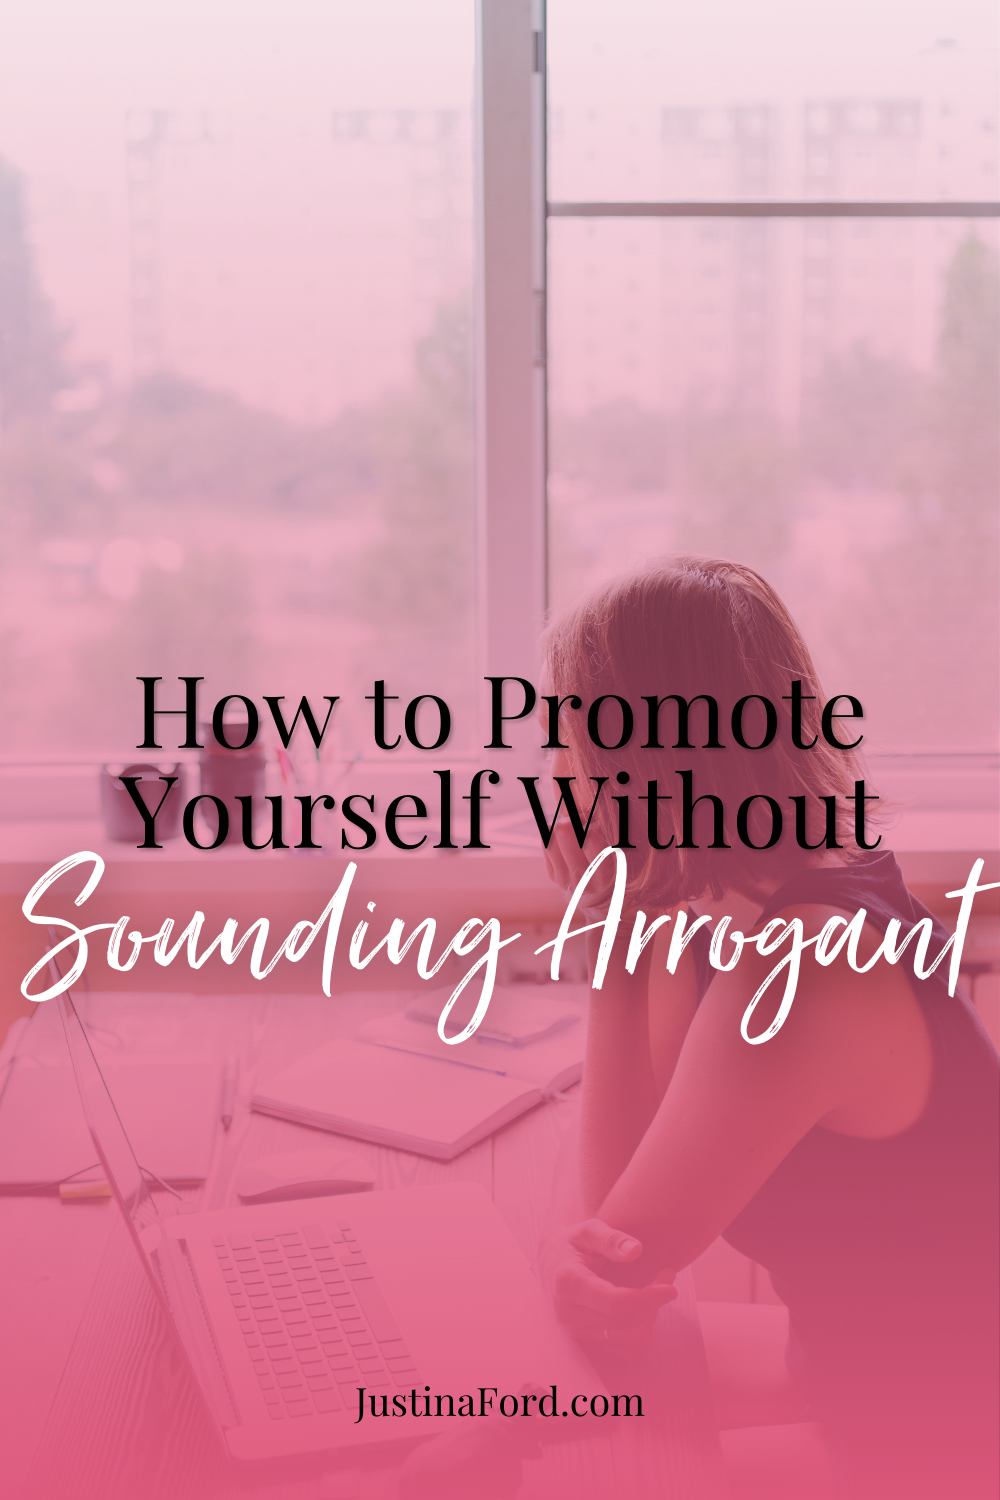 how to promote yourself without sounding arrogant